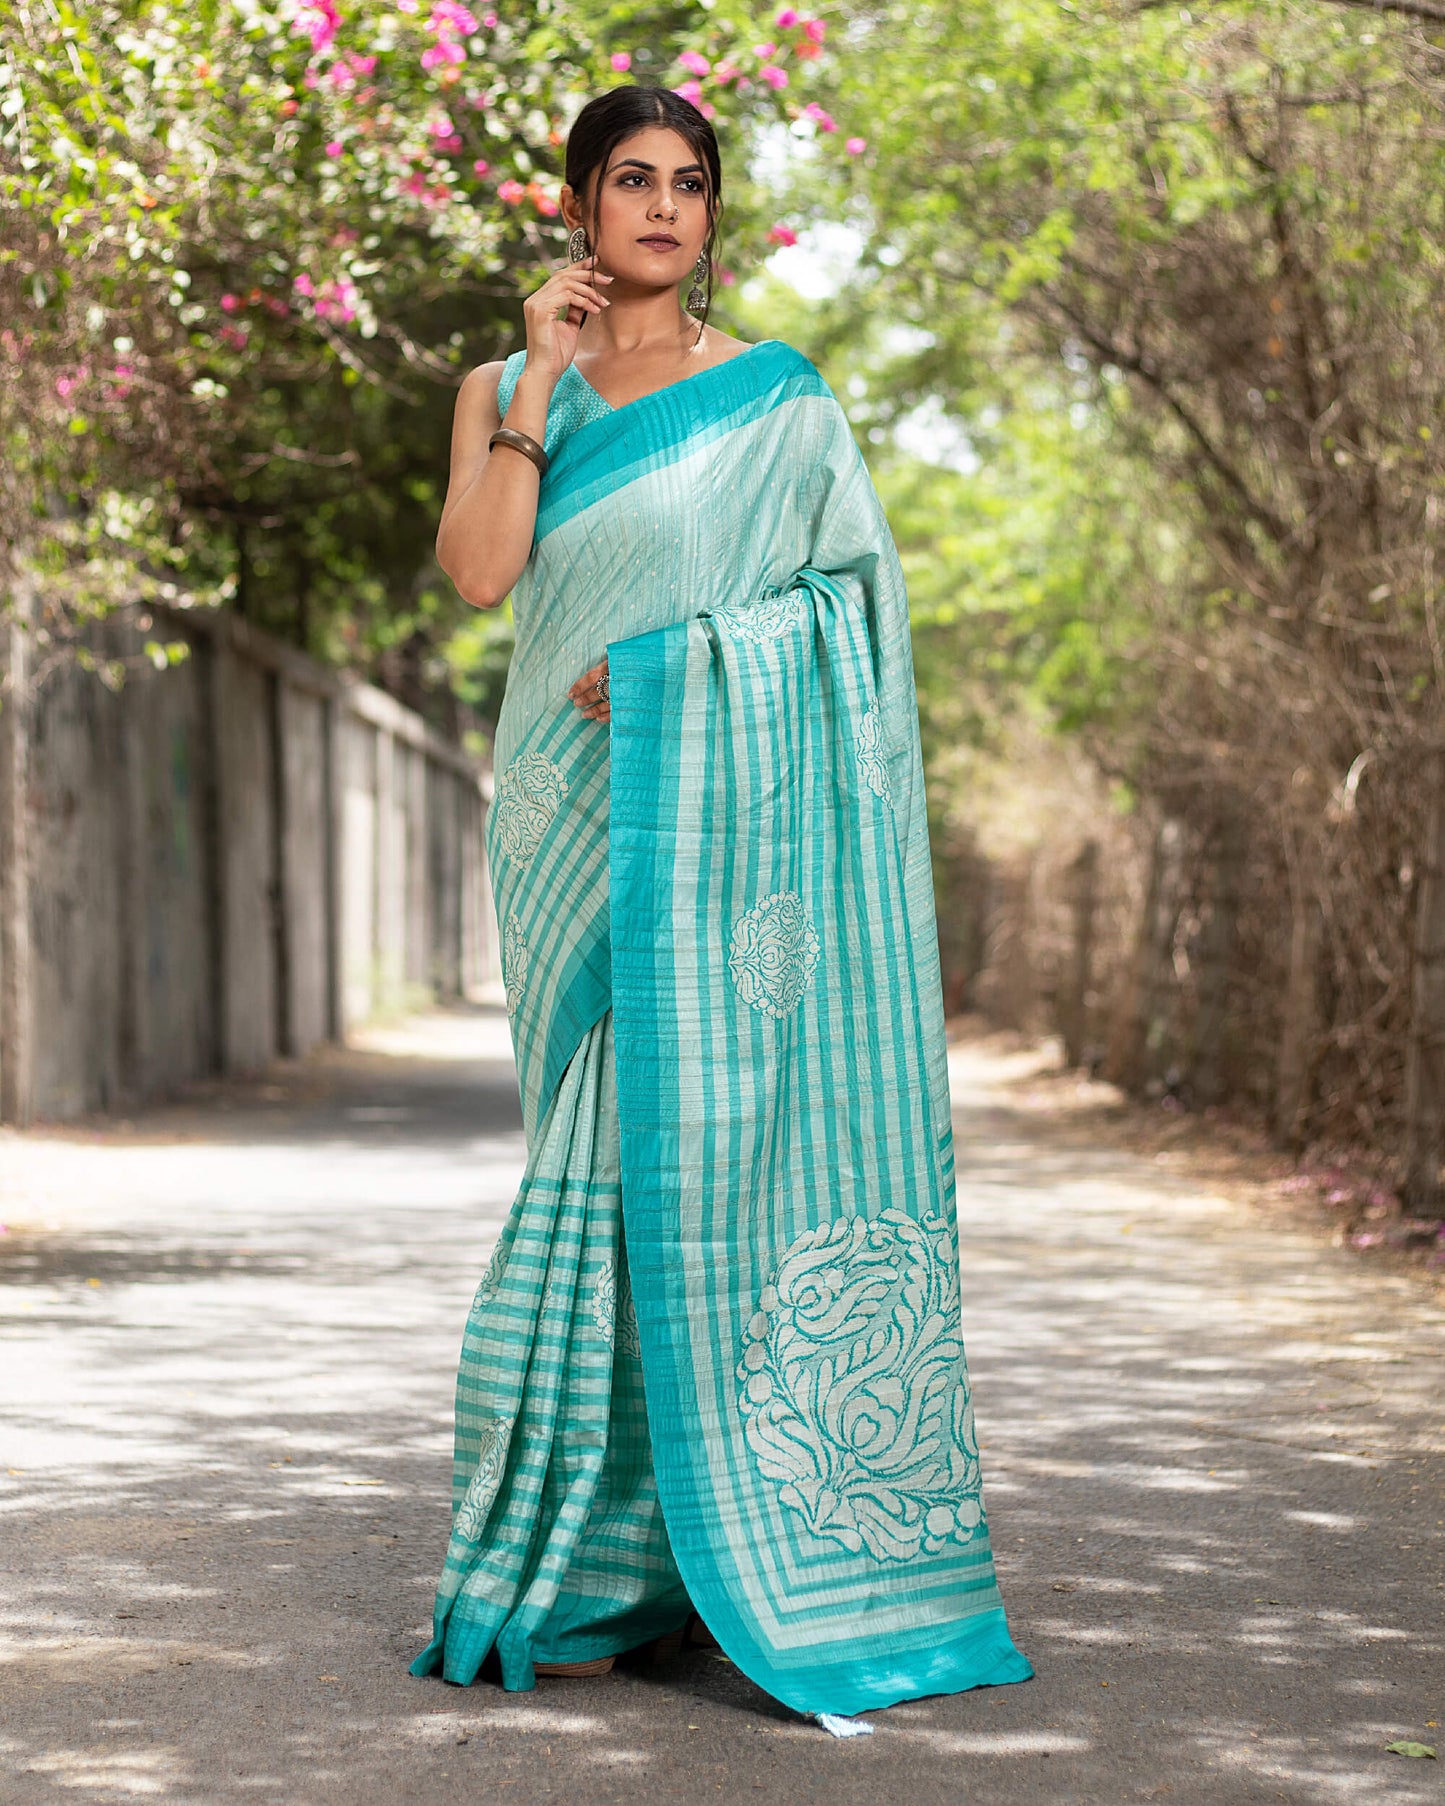 Electric Blue And White Ethnic Pattern Digital Print Heritage Art Silk Saree With Tassels